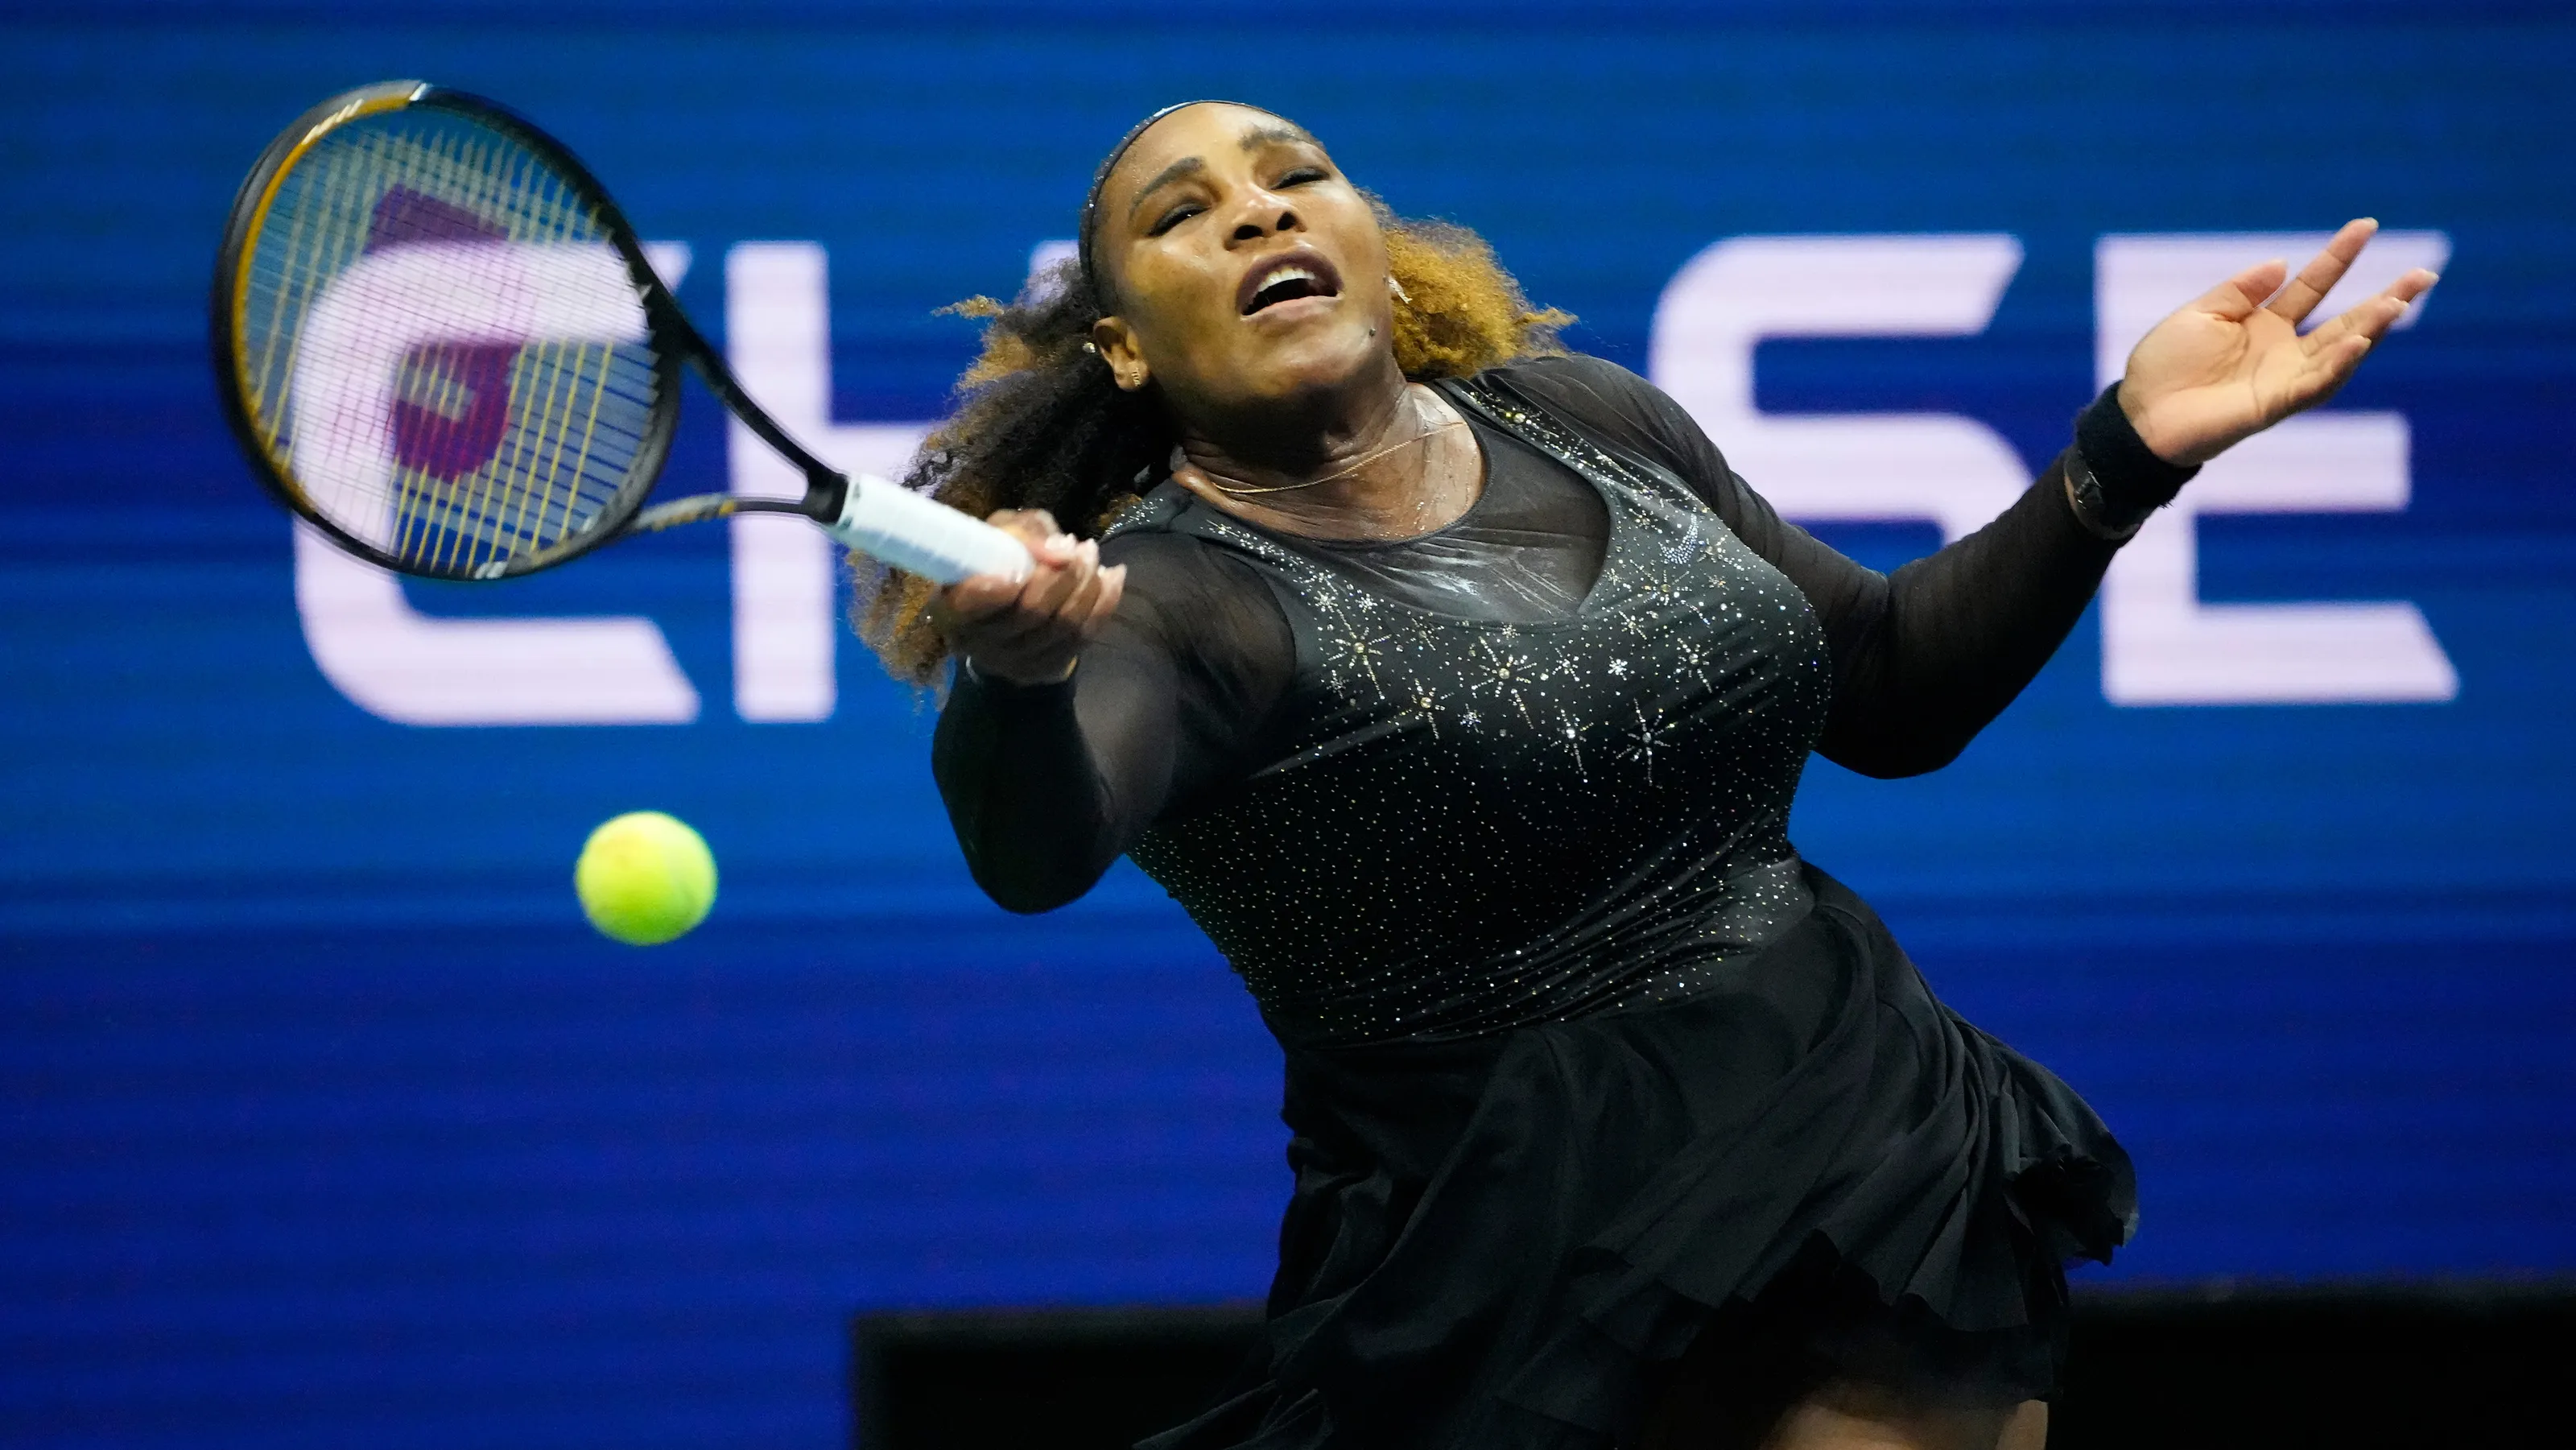 How many Grand Slam singles titles has Serena Williams won in her career?